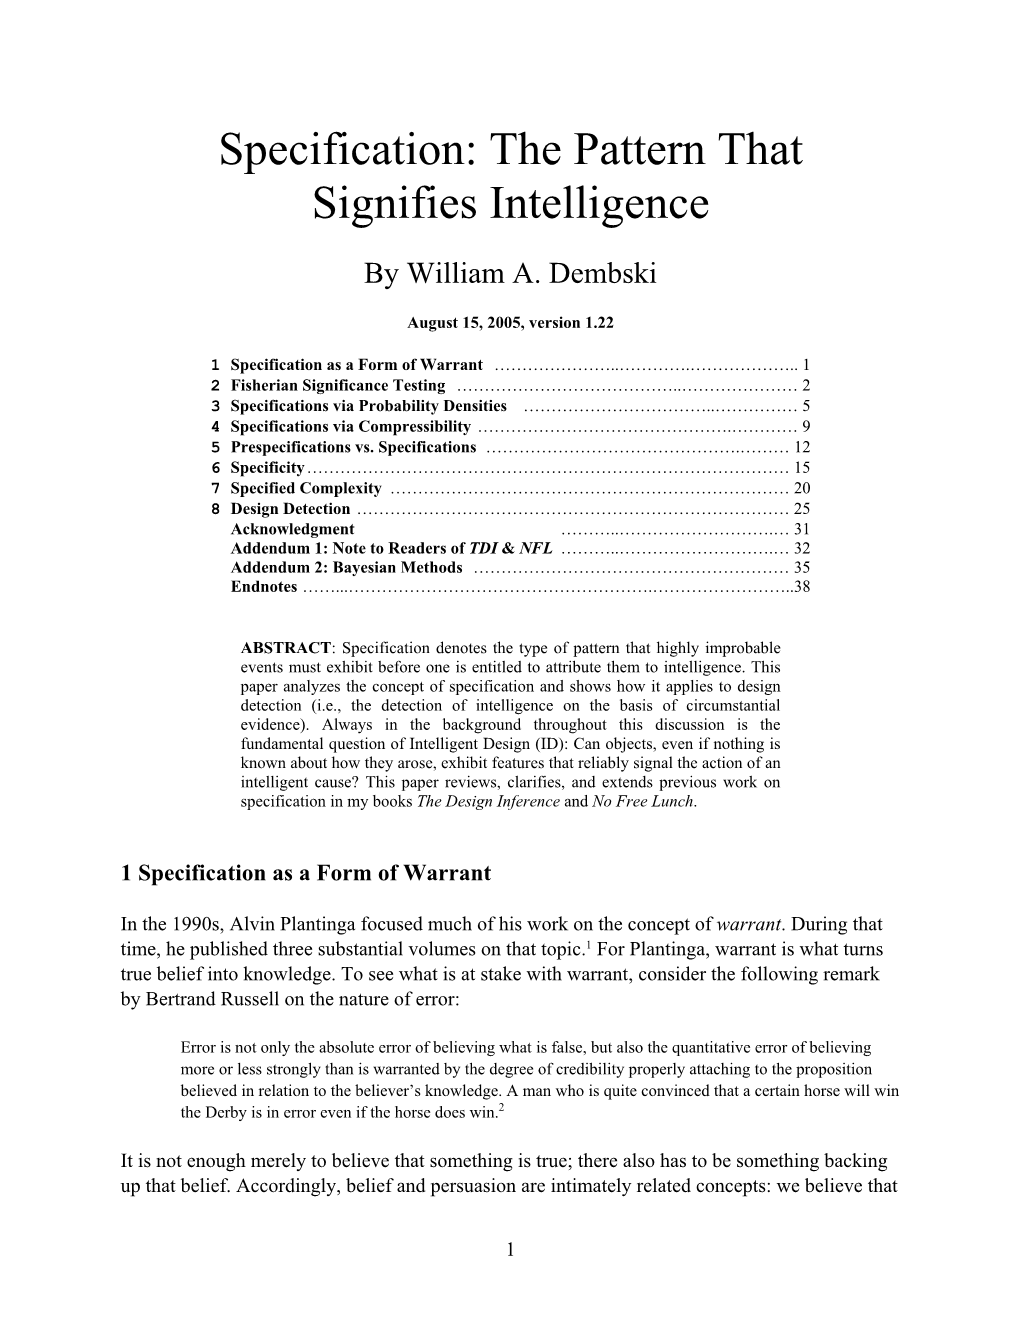 Specification: the Pattern That Signifies Intelligence